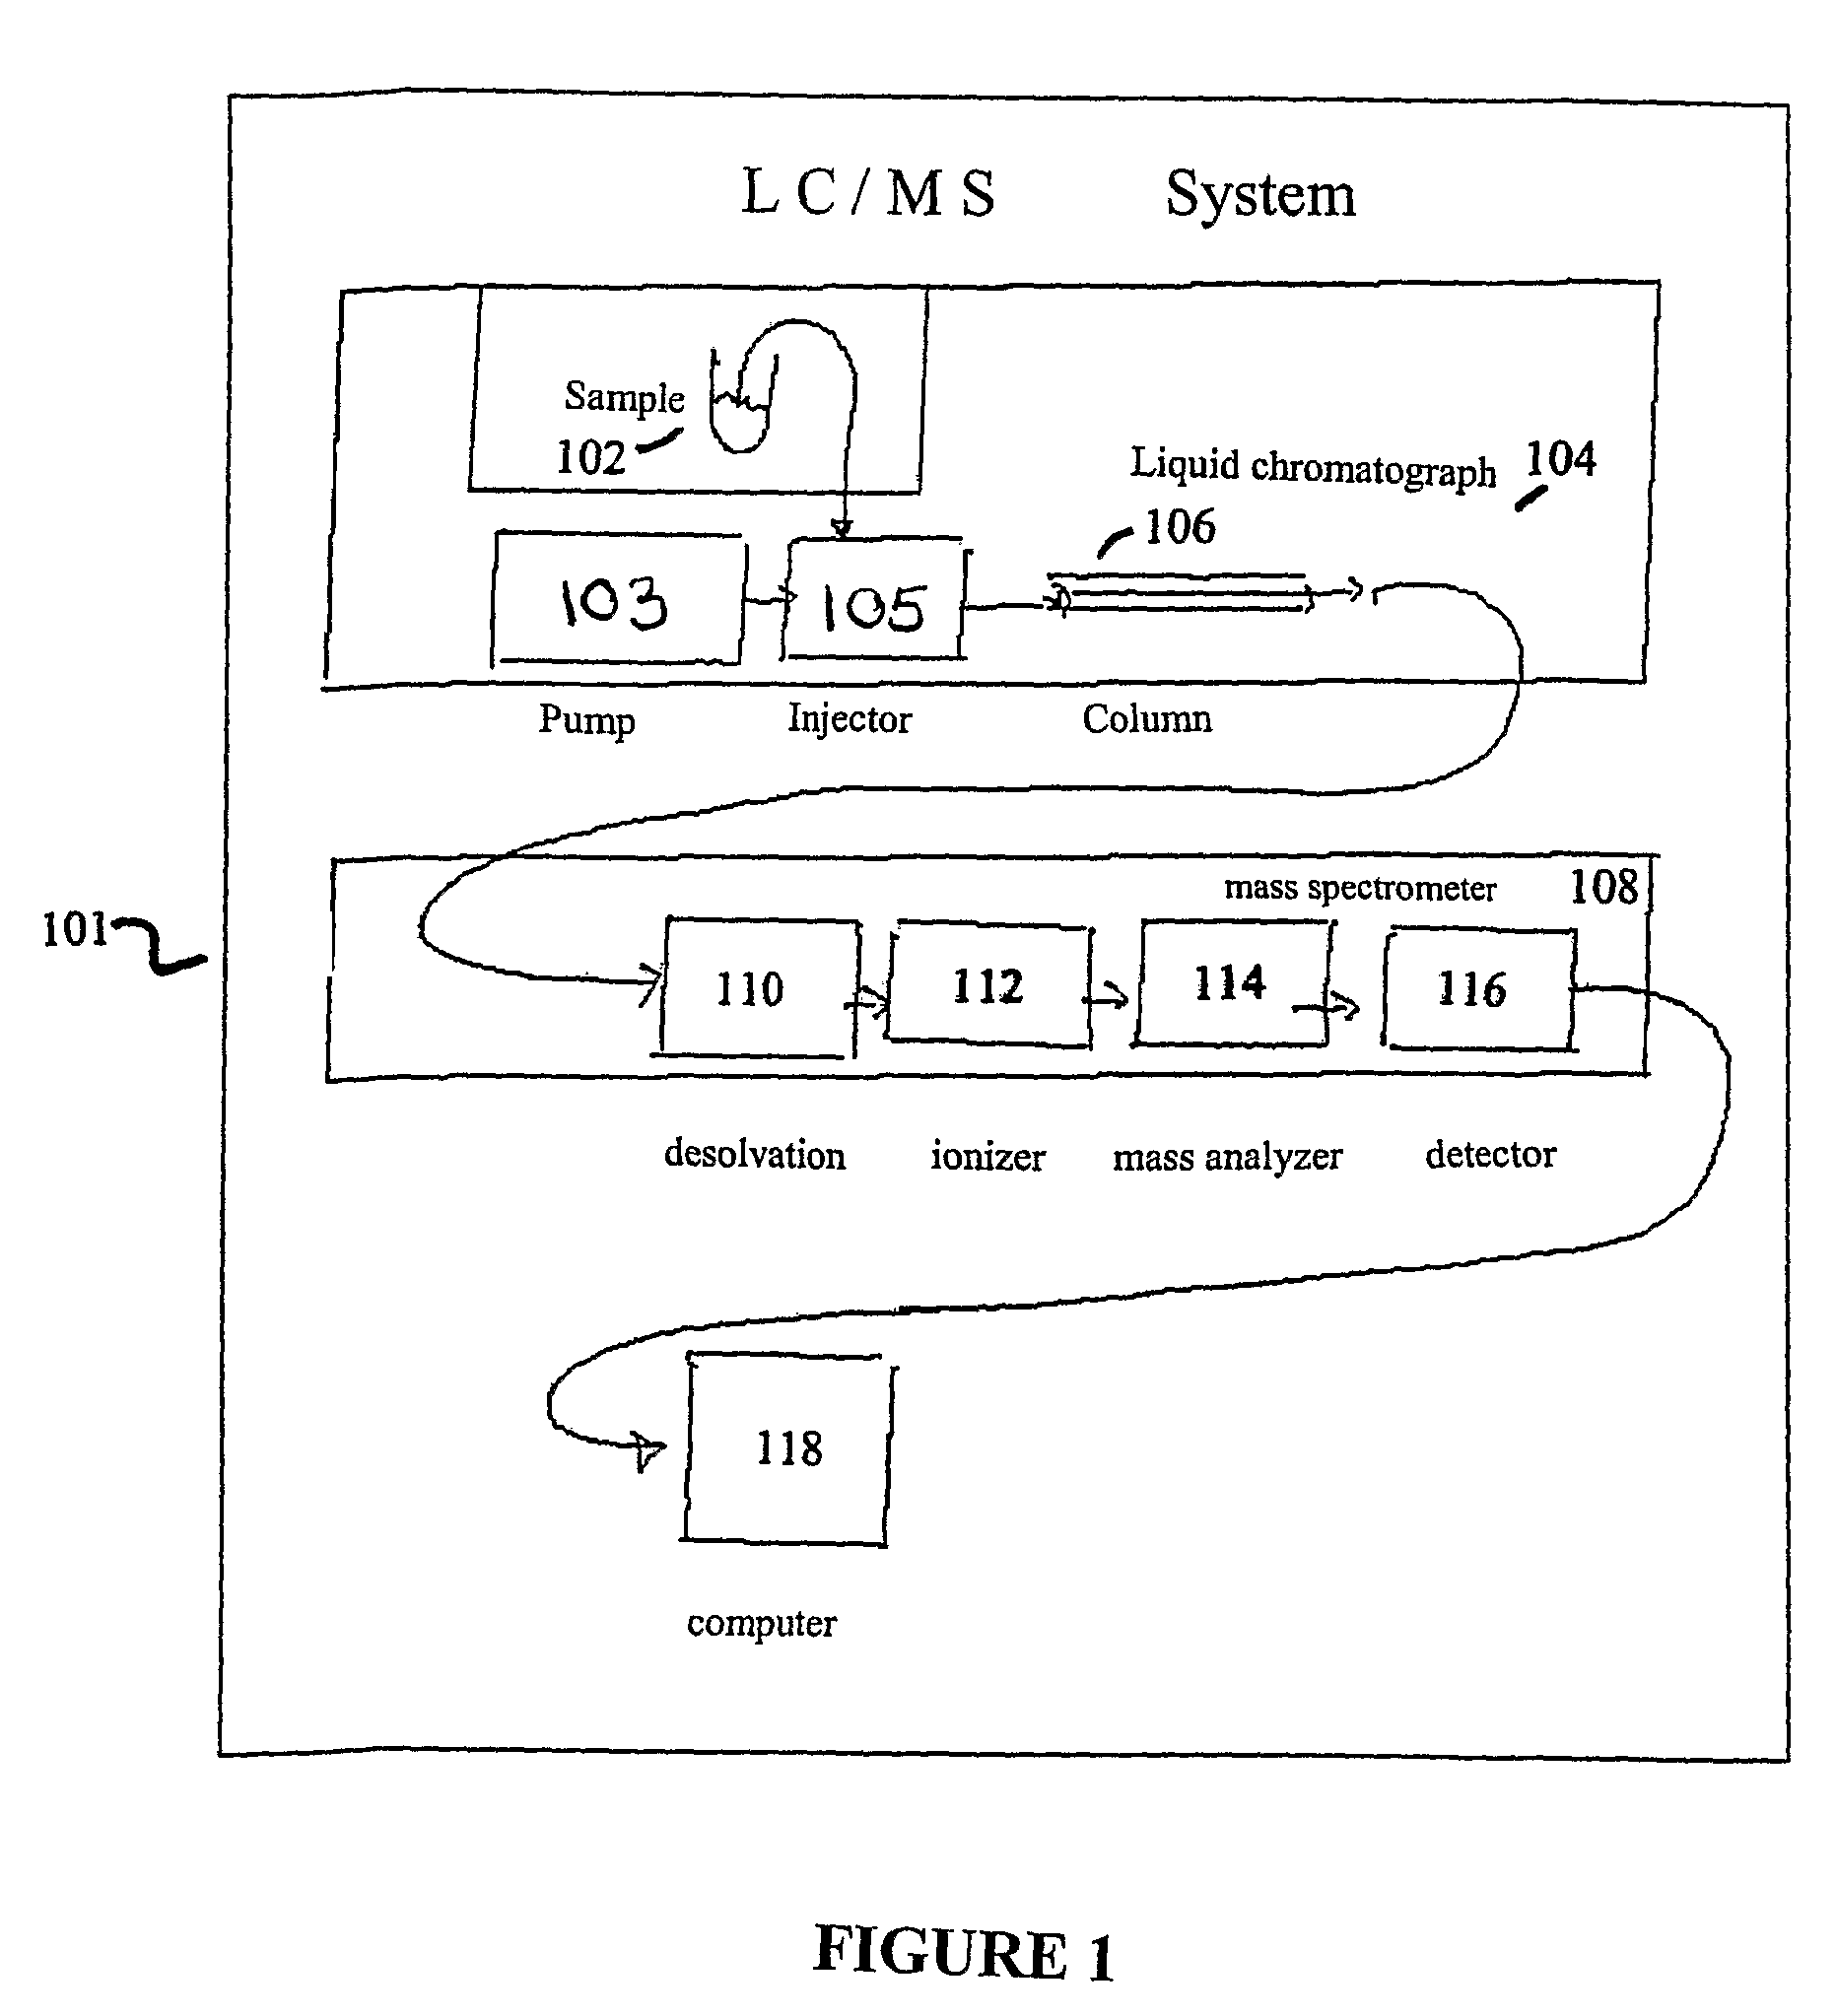 Apparatus and method for identifying peaks in liquid chromatography/mass spectrometry data and for forming spectra and chromatograms